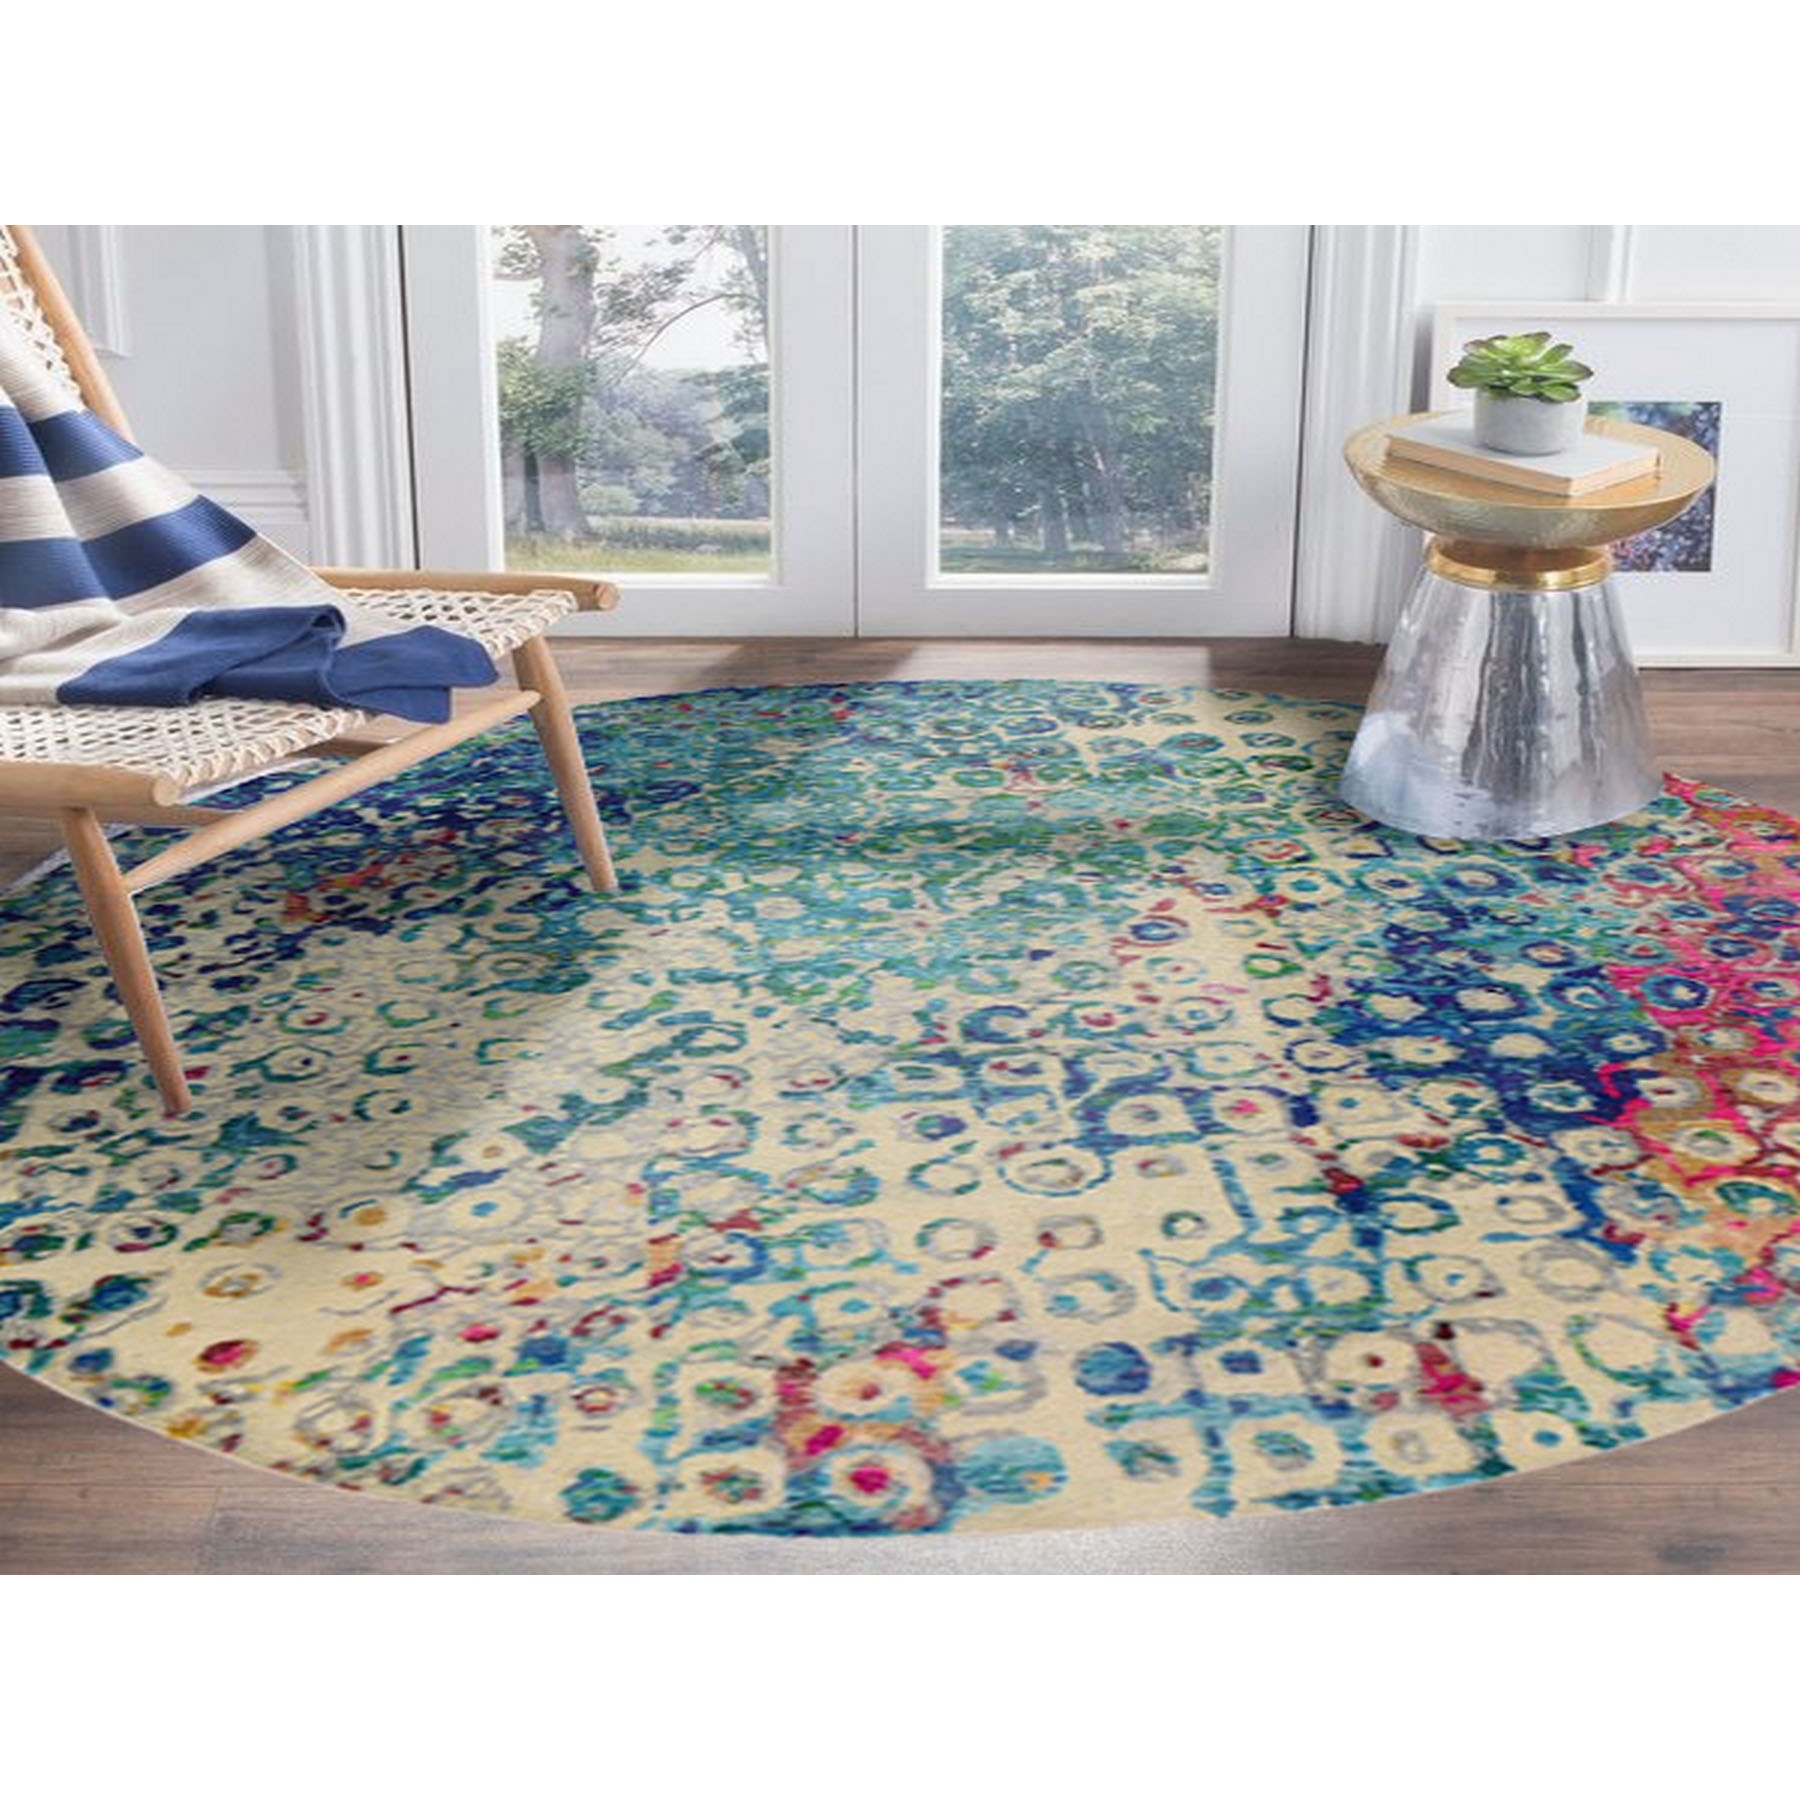 6-x6- THE PEACOCK, Sari Silk Round Colorful Hand Knotted Oriental Rug 